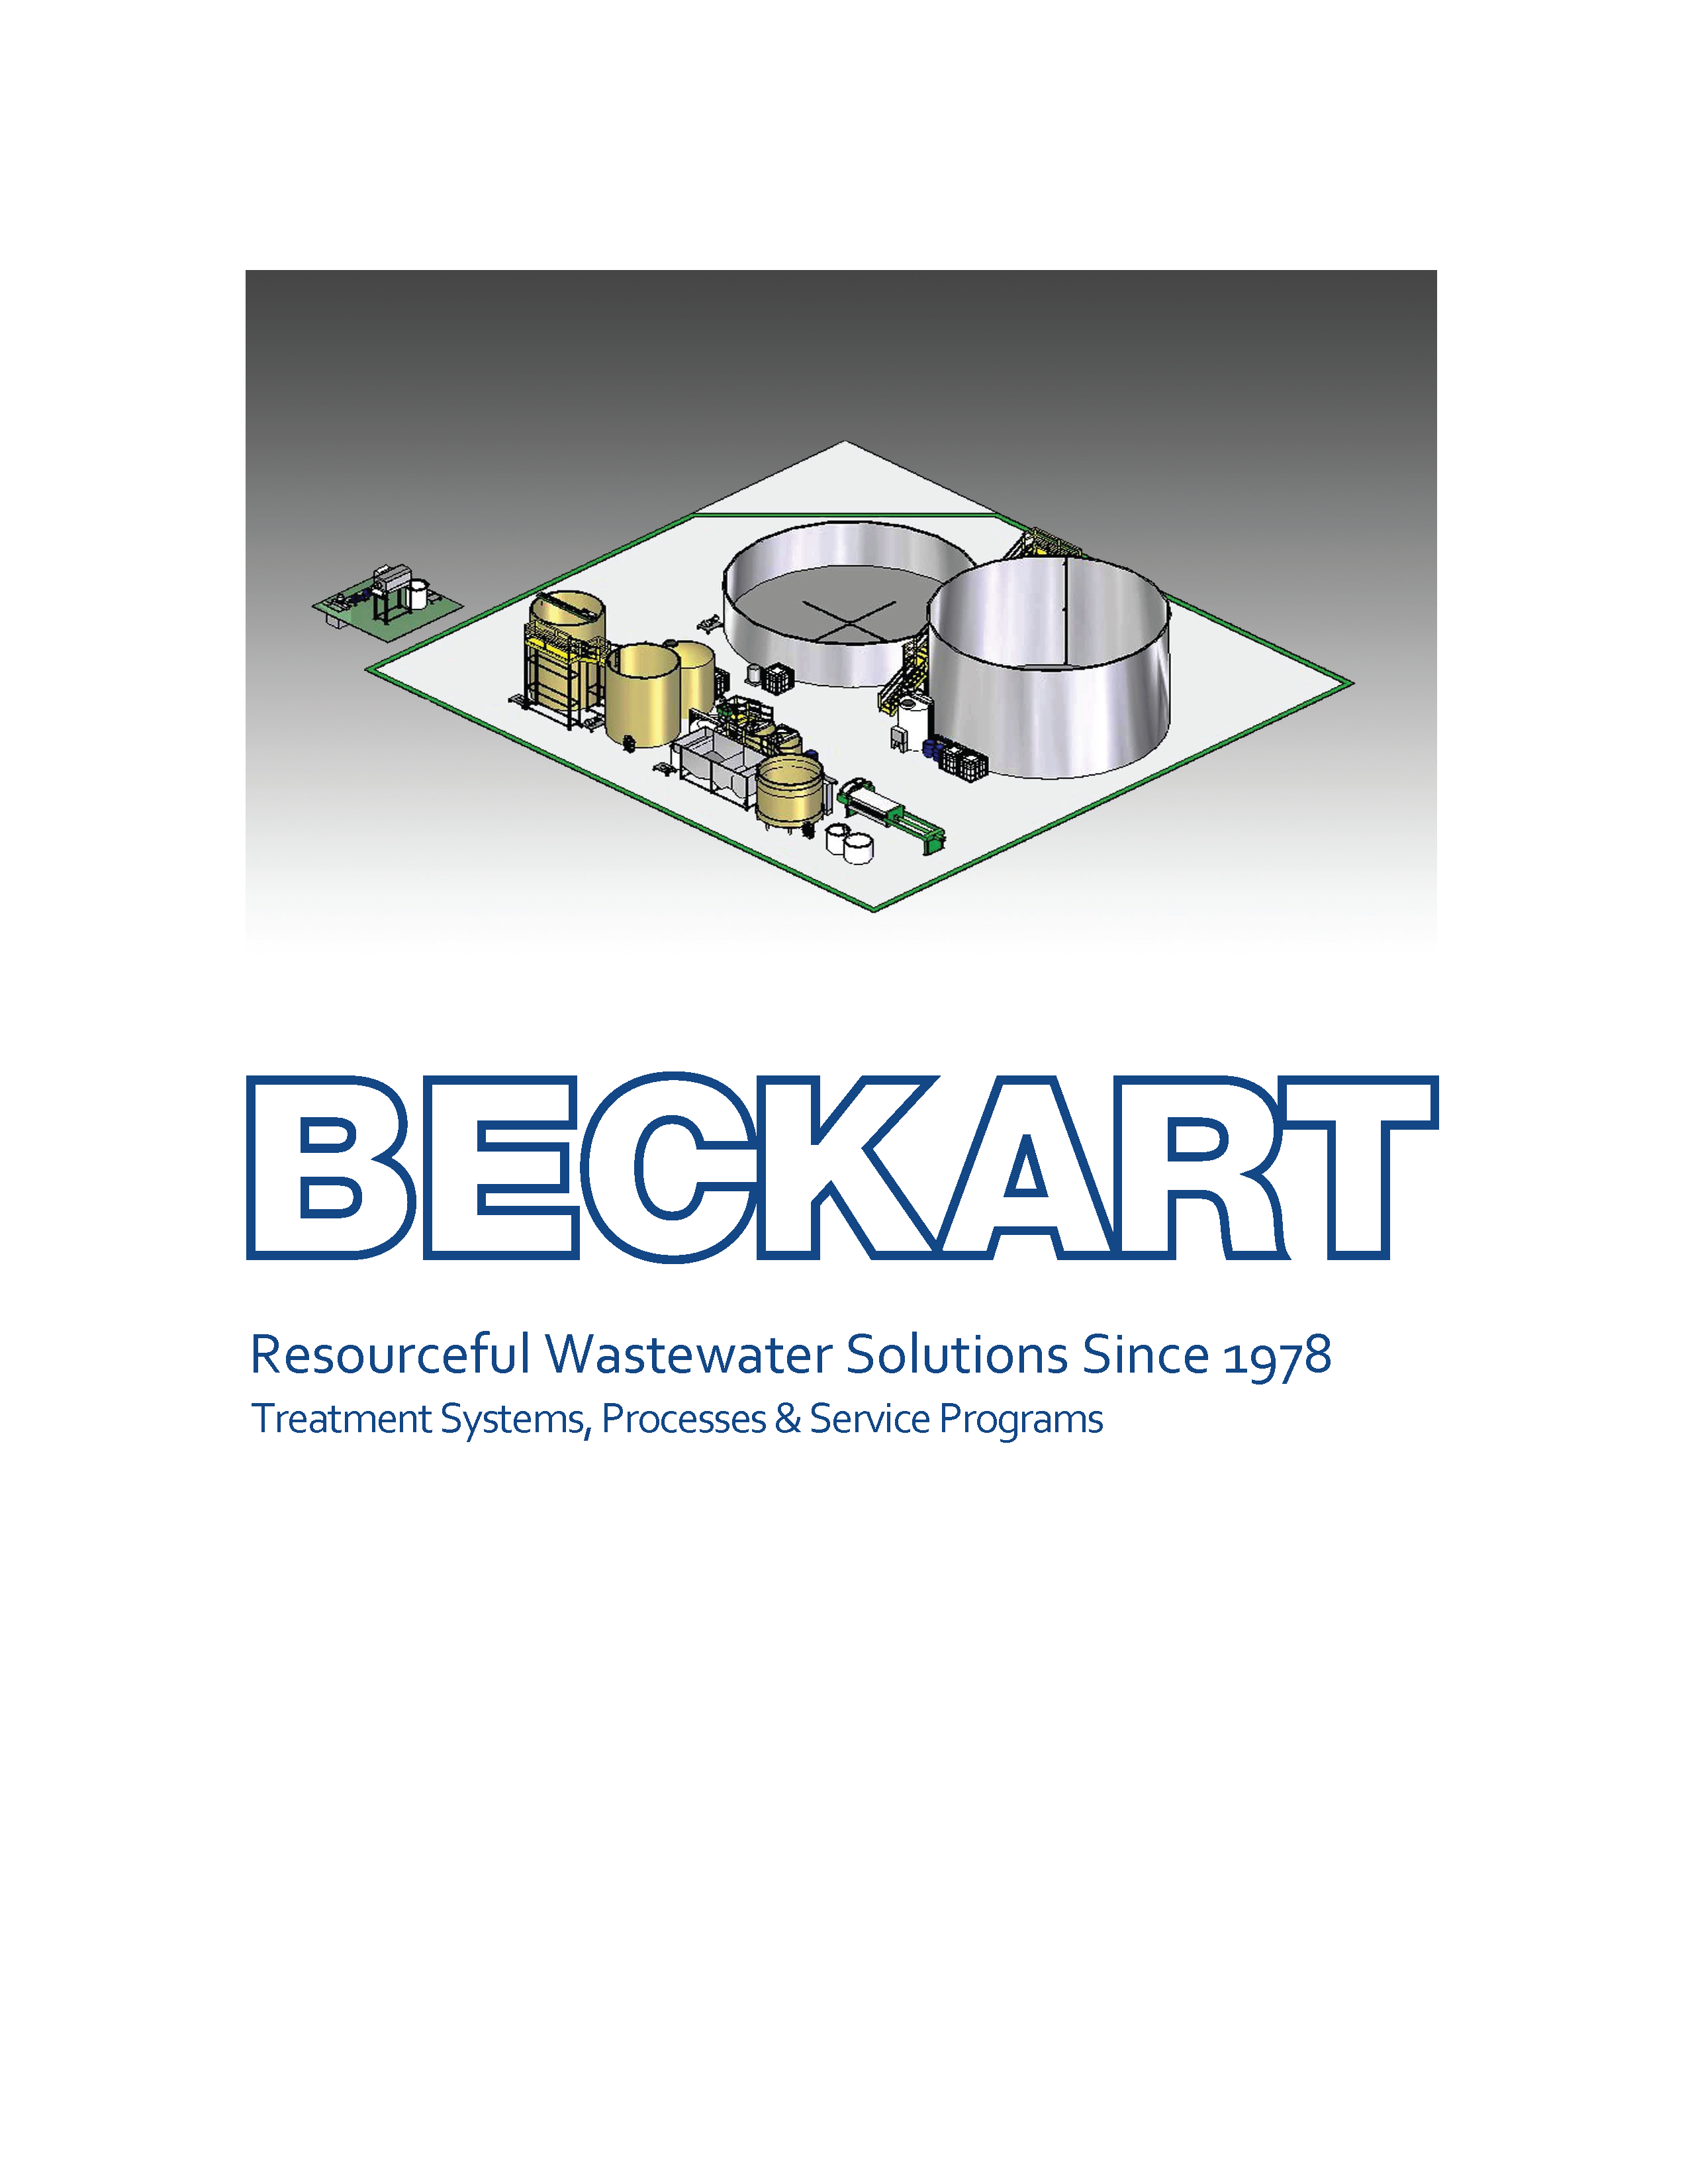 Read more about Beckart Solutions